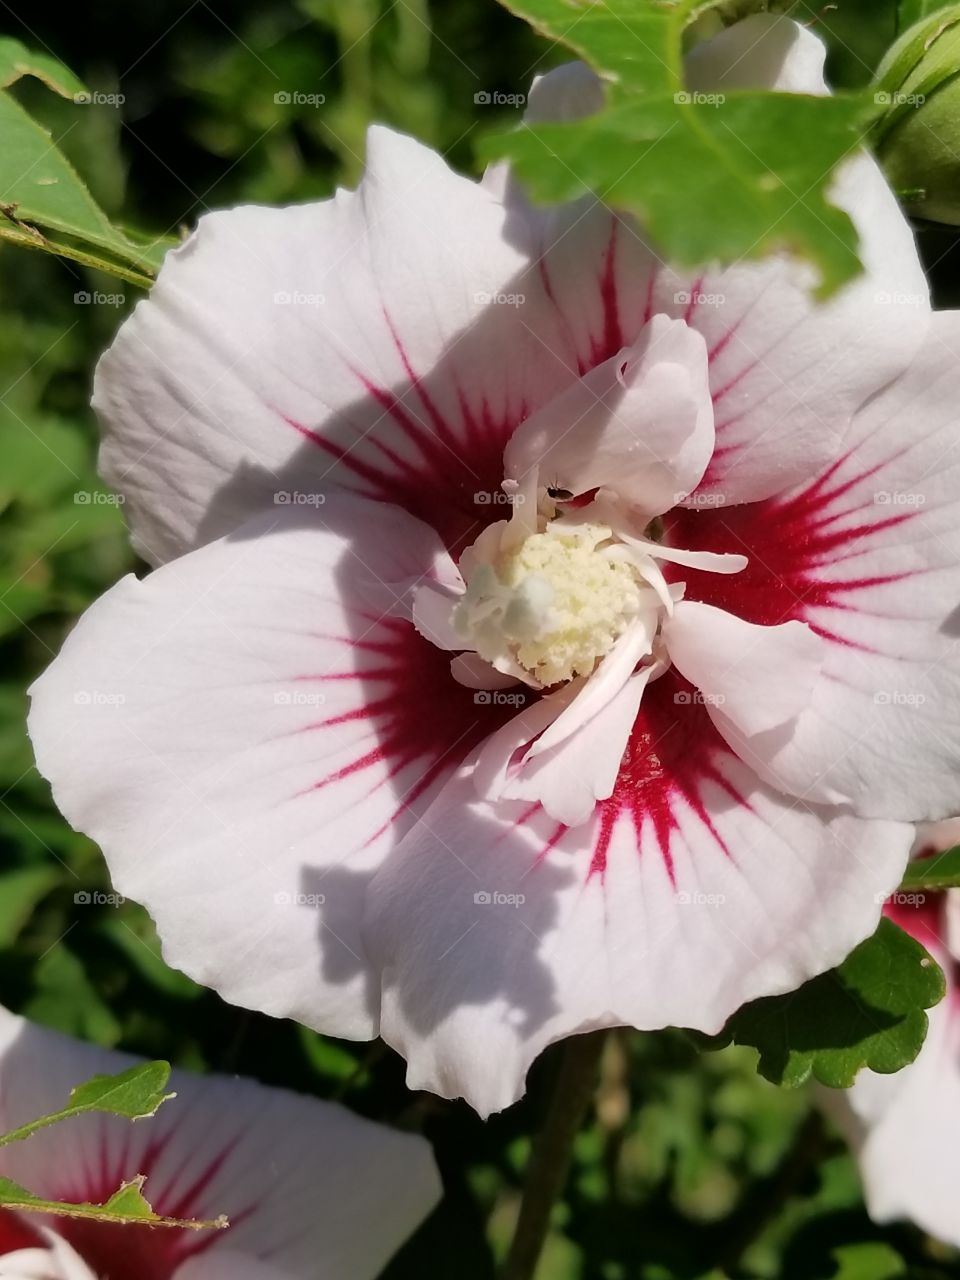 I love blooming in the warm summer sun white and red petals with a pale yellow center.